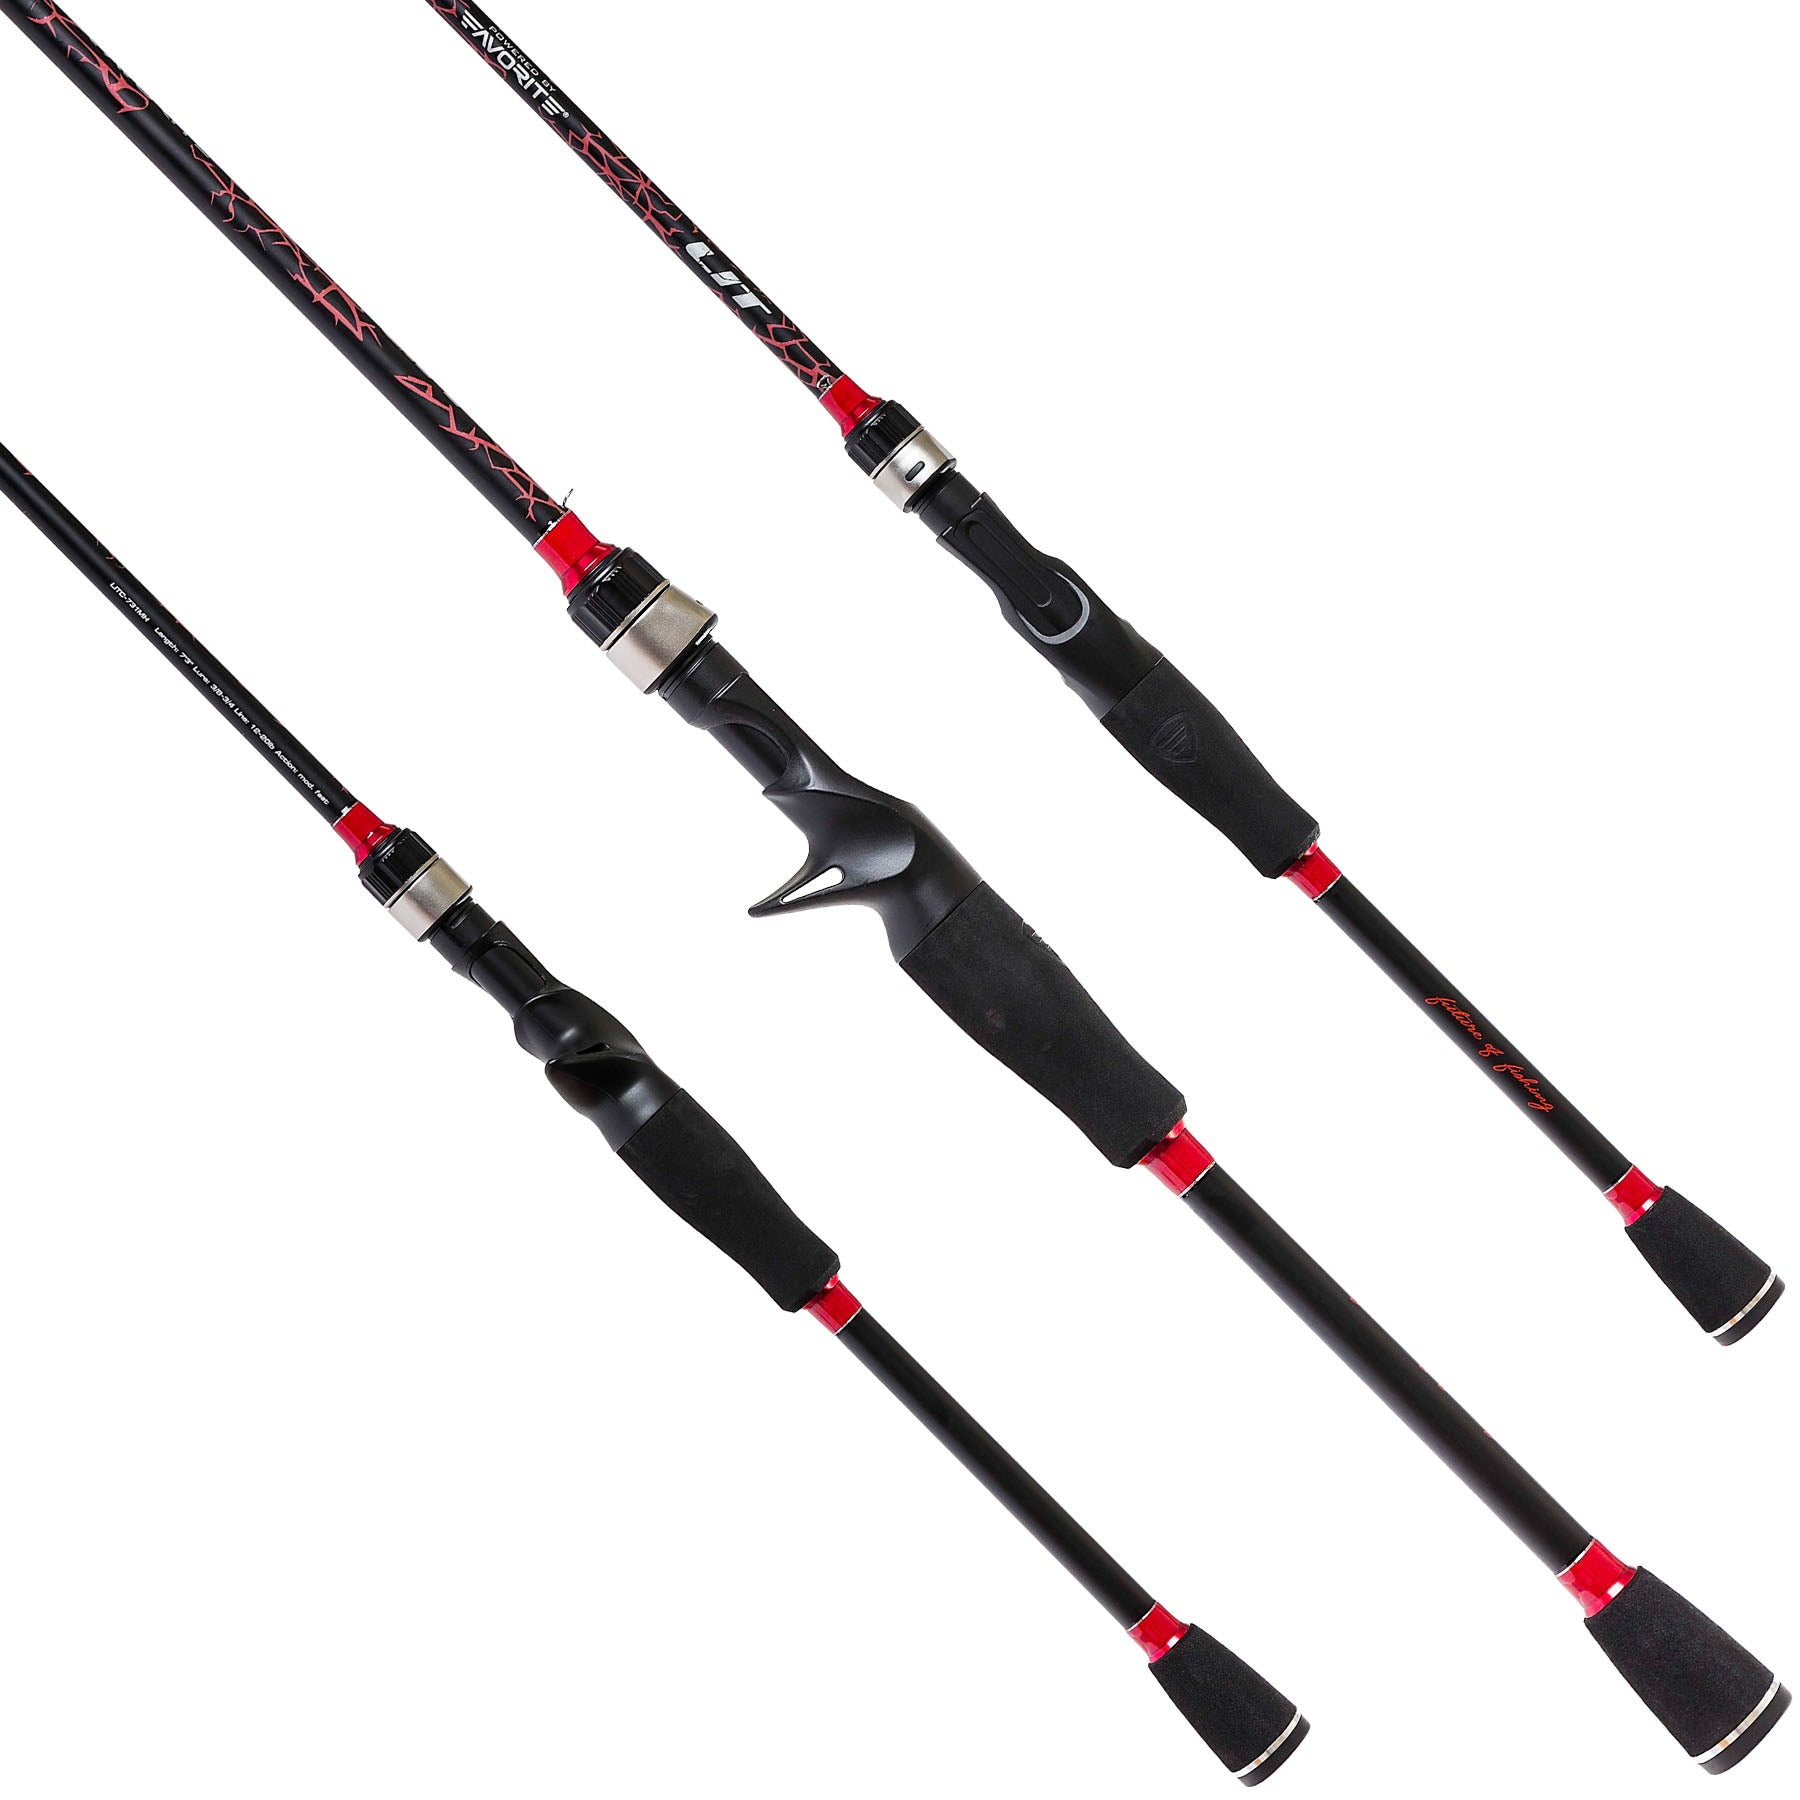 100% Carbon Fiber Spinning Fishing Rods Fast Action Fishing